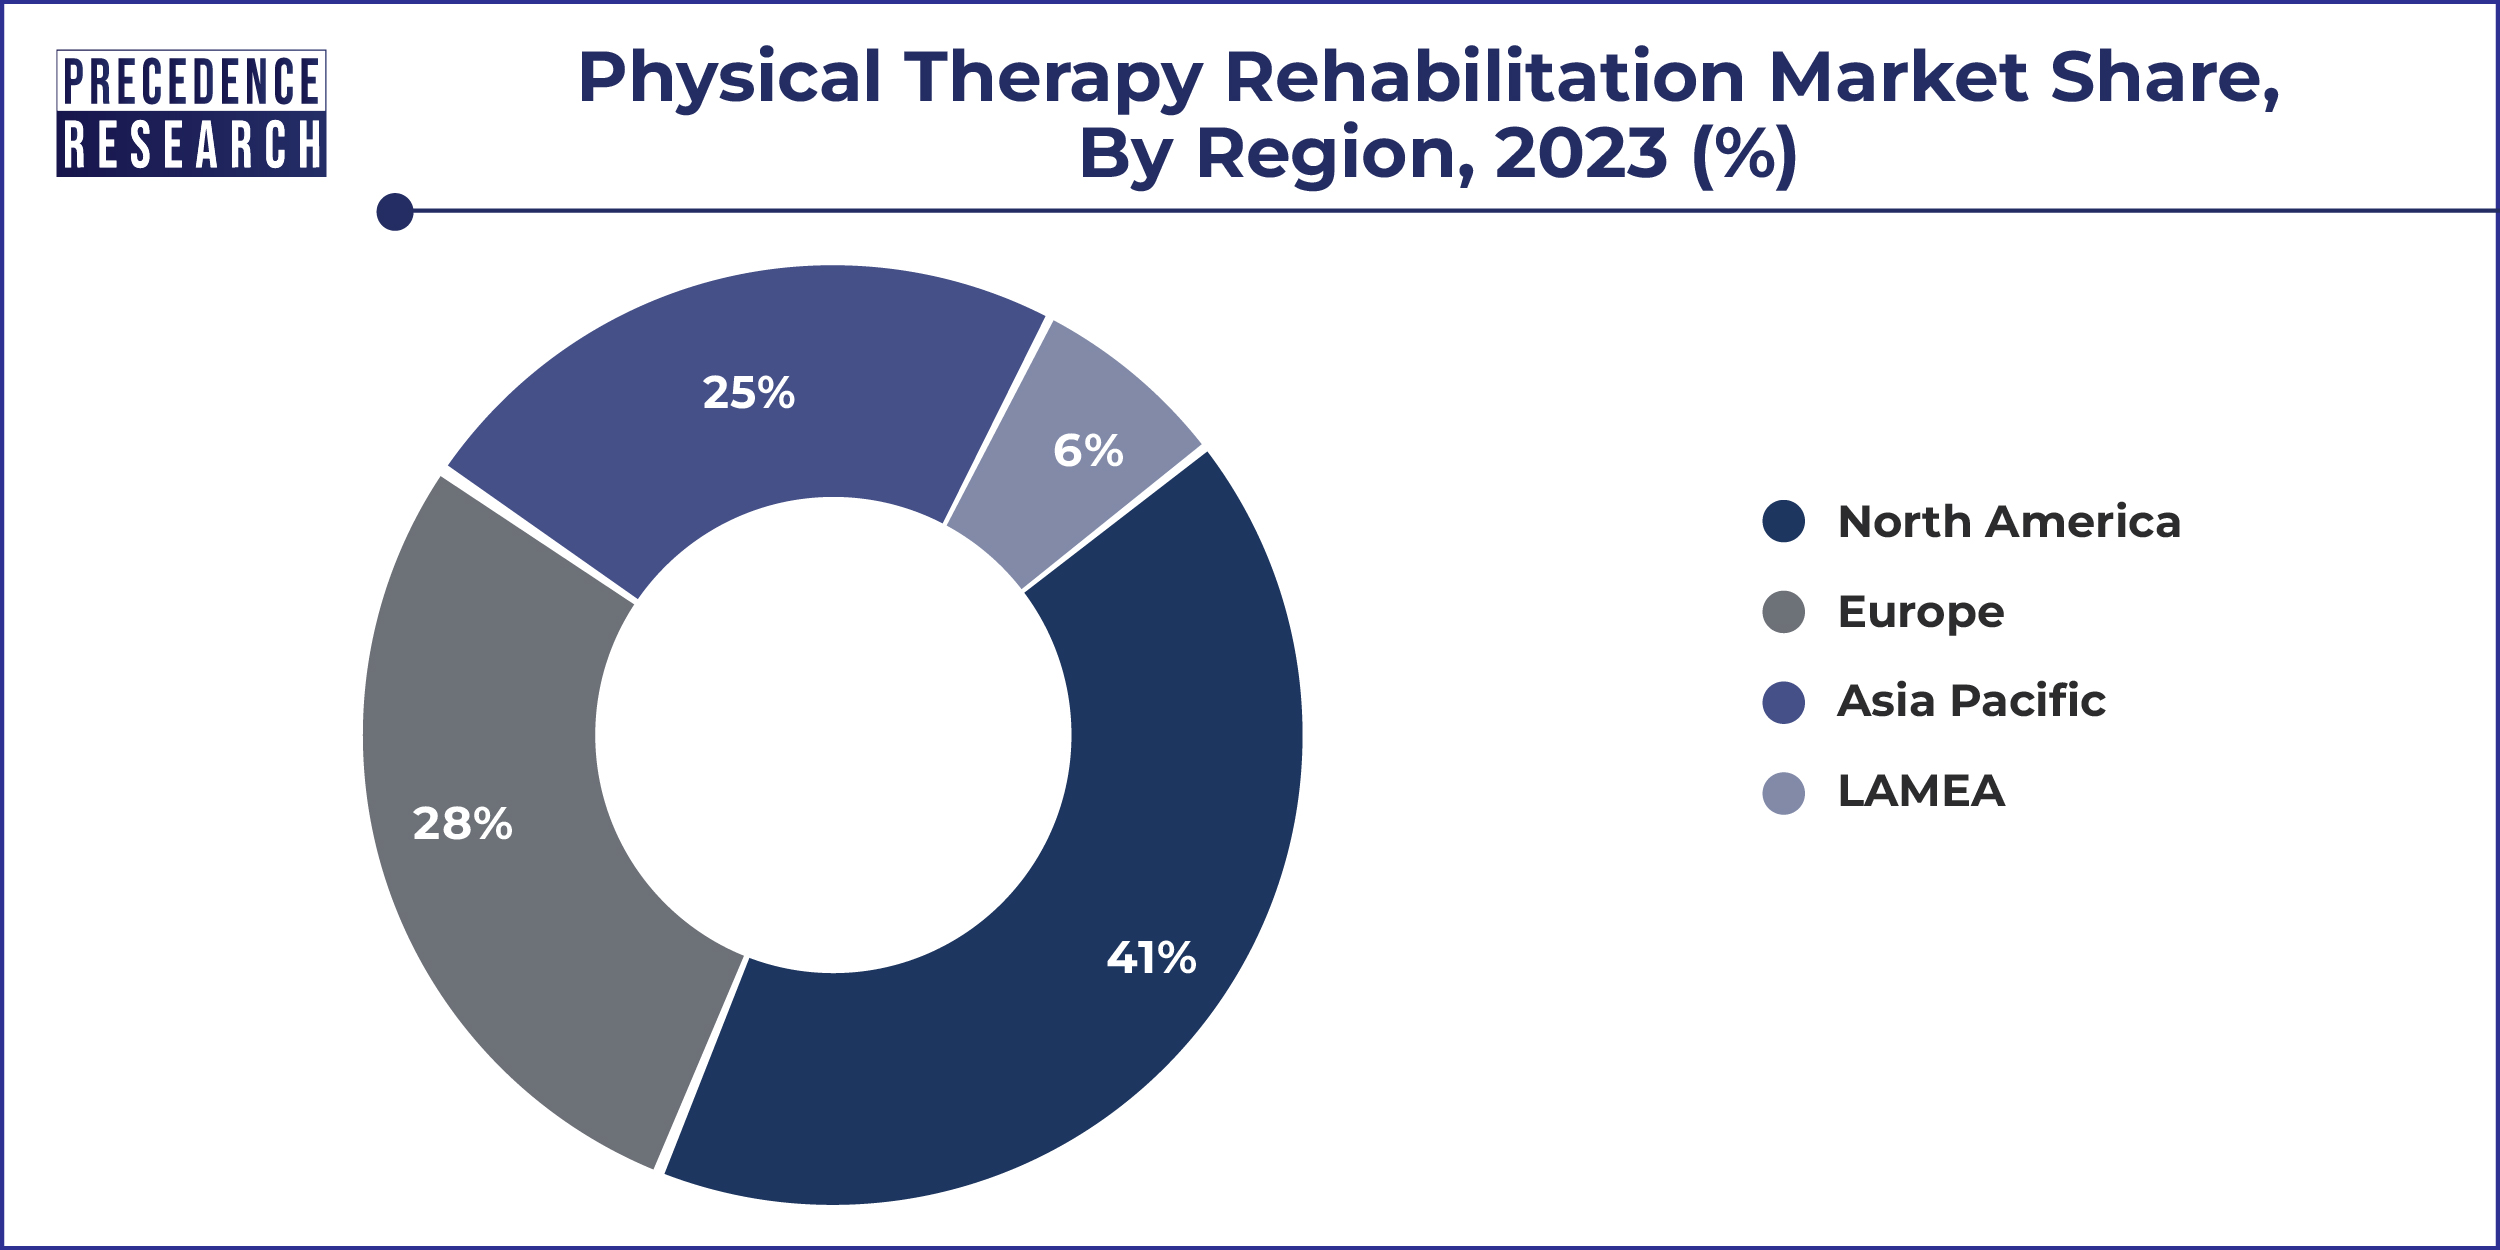 Physical Therapy Rehabilitation Market Share, By Region, 2023 (%)